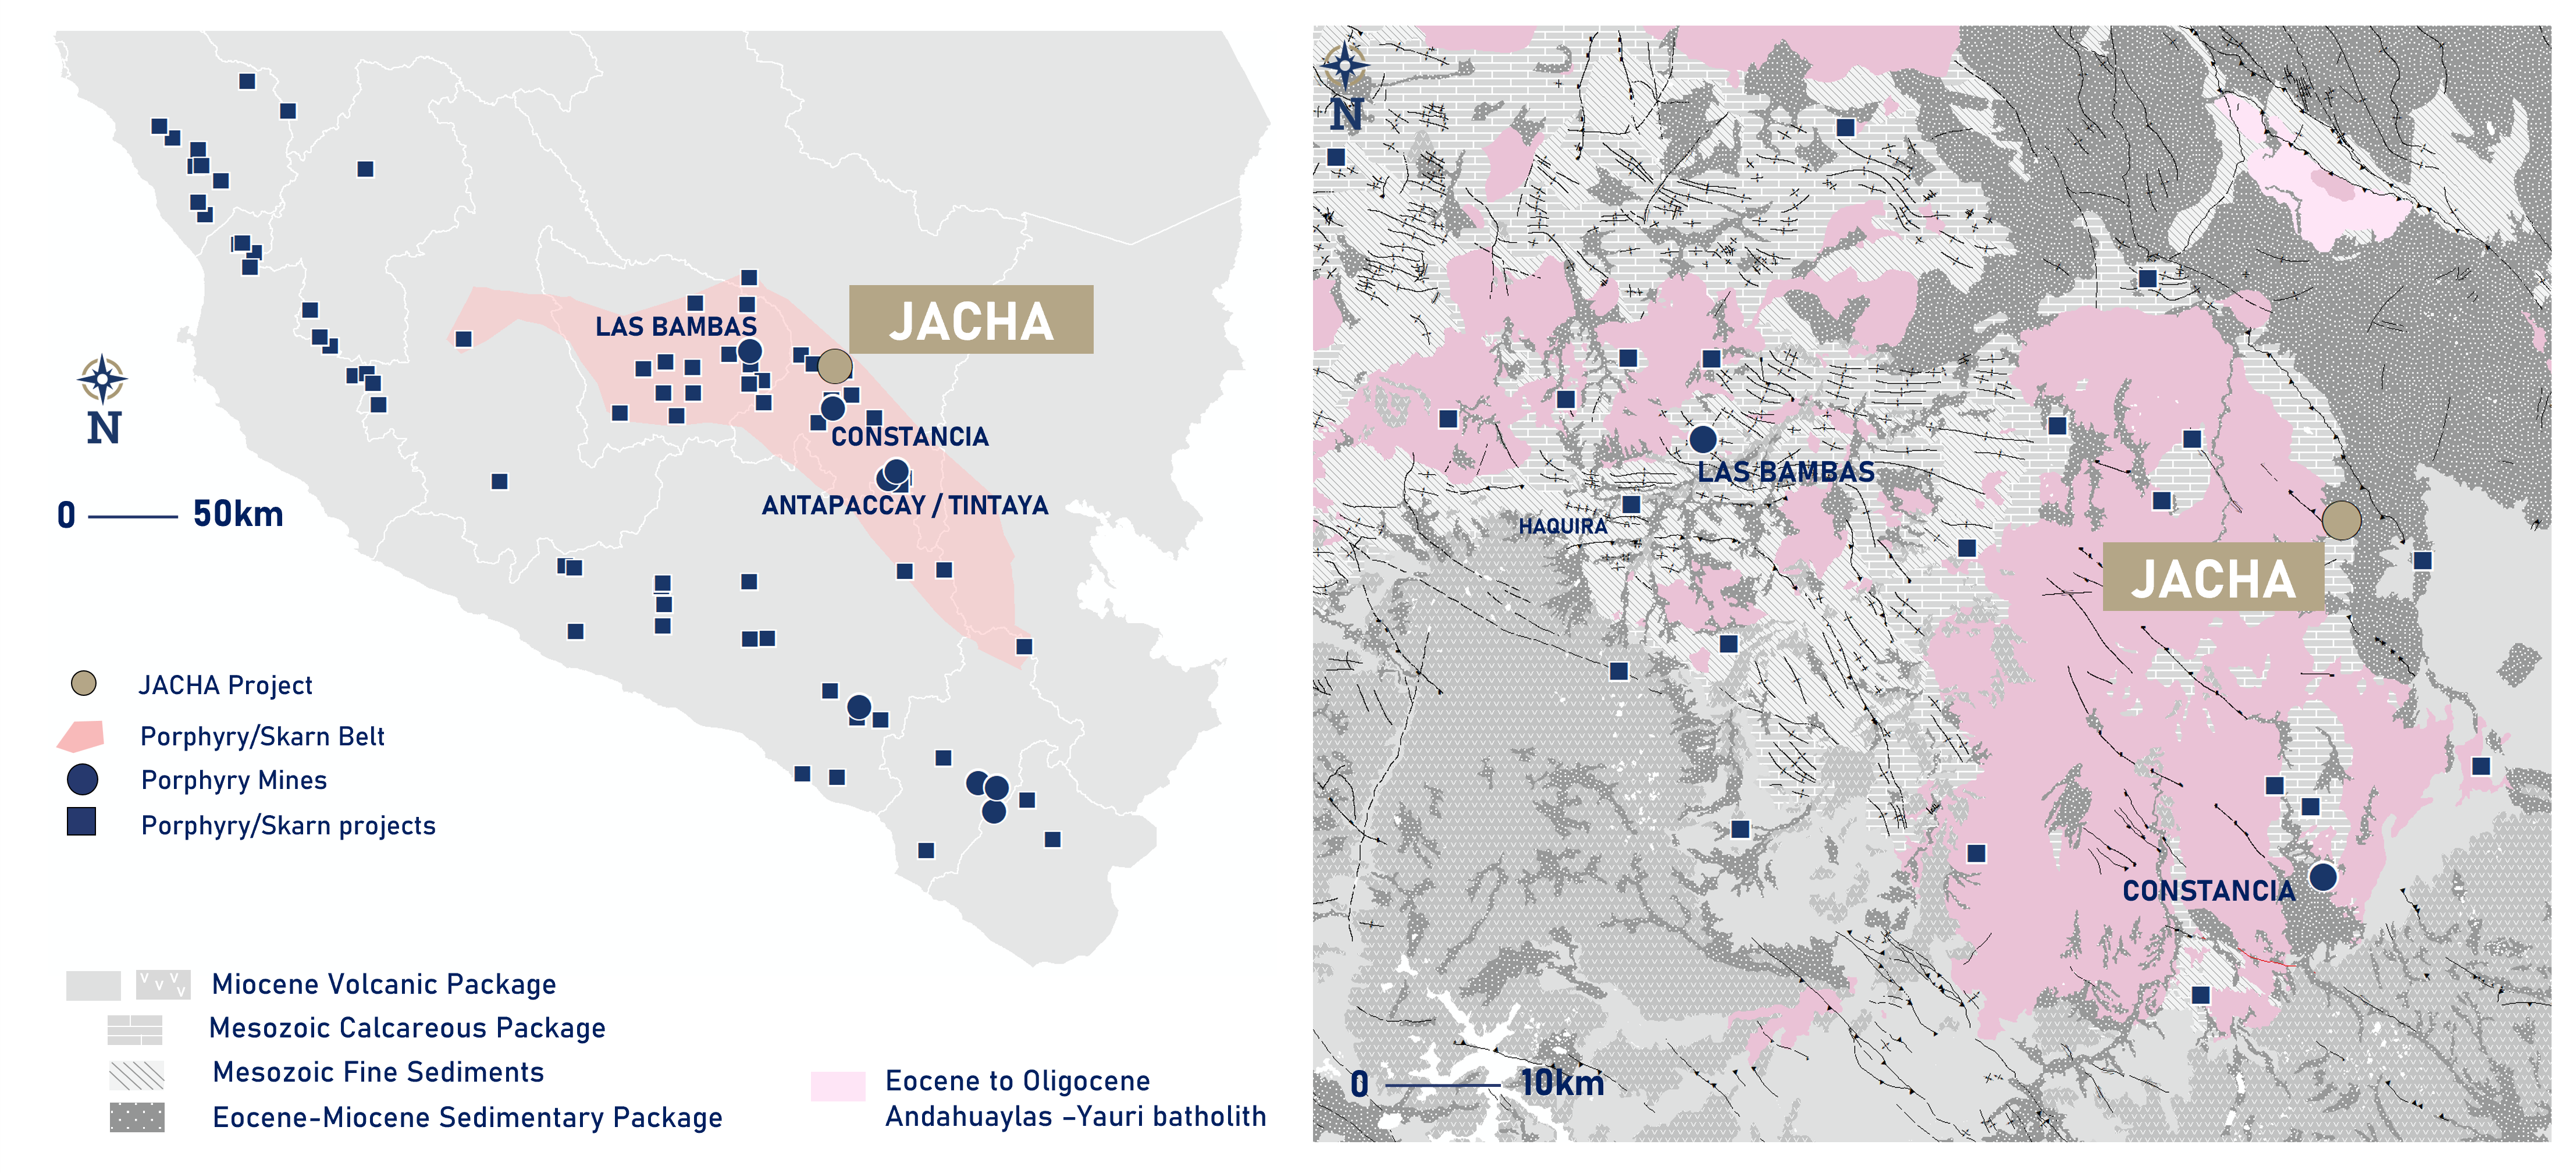 Location of Jacha within the Andahuaylas-Yauri porphyry / skarn belt (left), and a close up map of the property location with respect to the reginal geology and location of Las Bambas and Constancia (right)